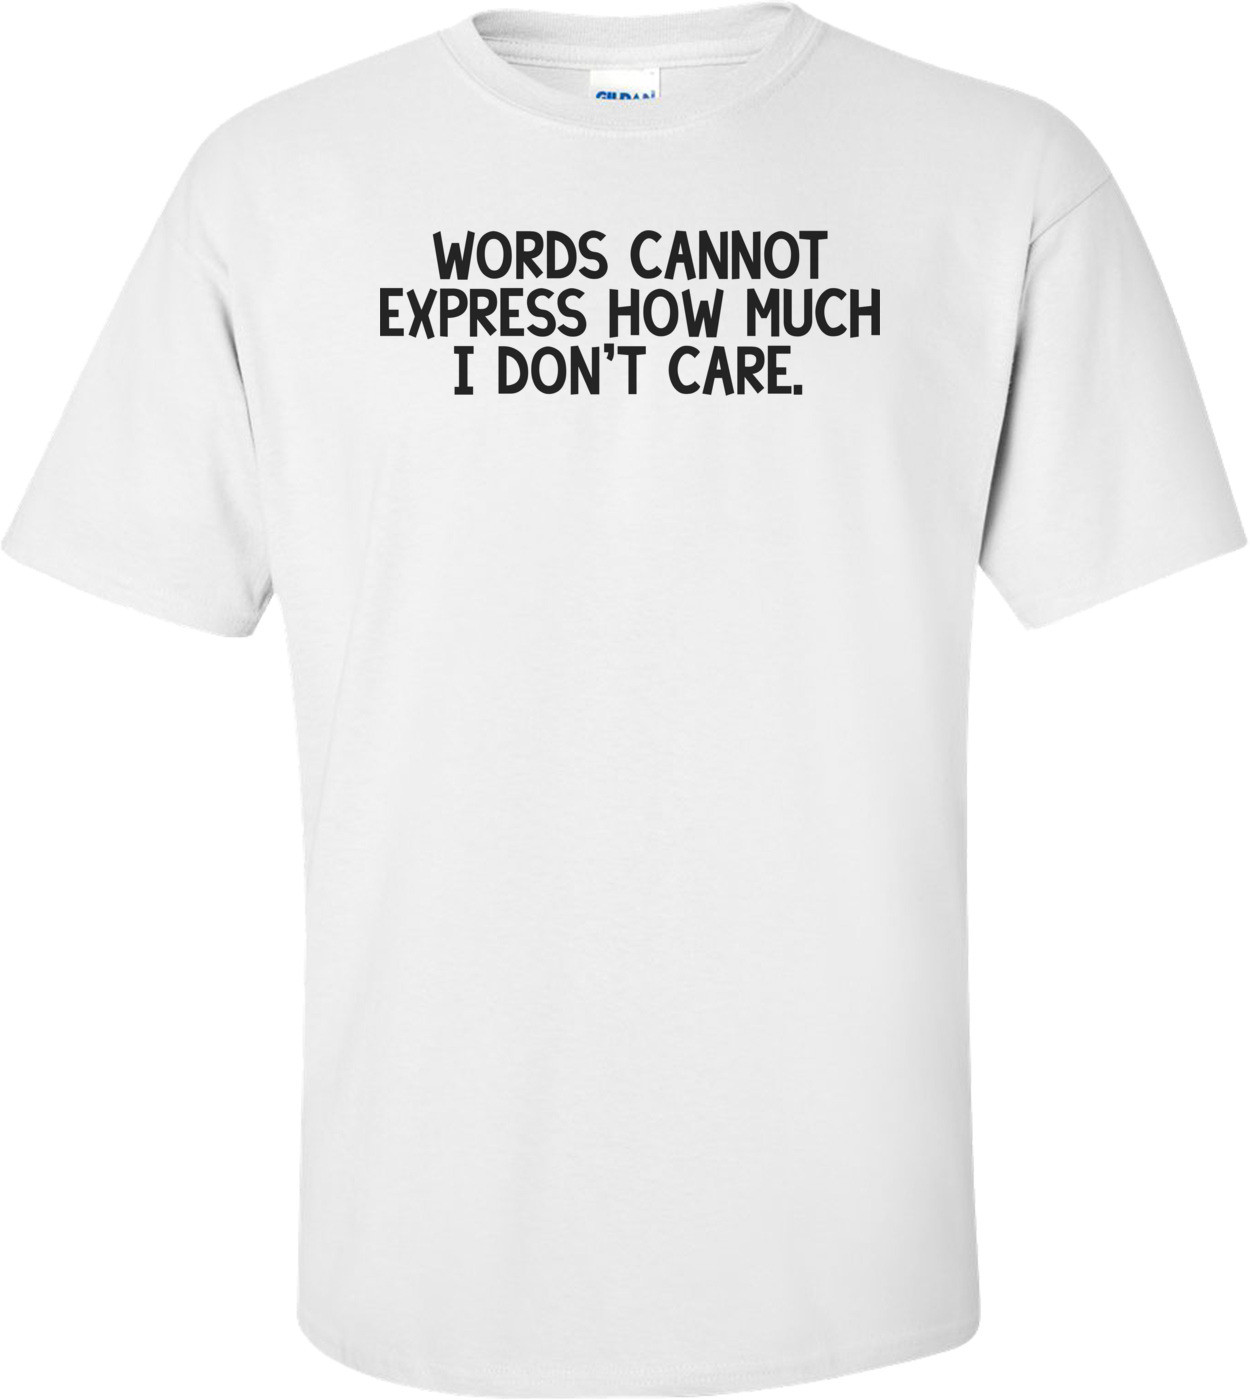 Words cannot express how much I don't care. Shirt